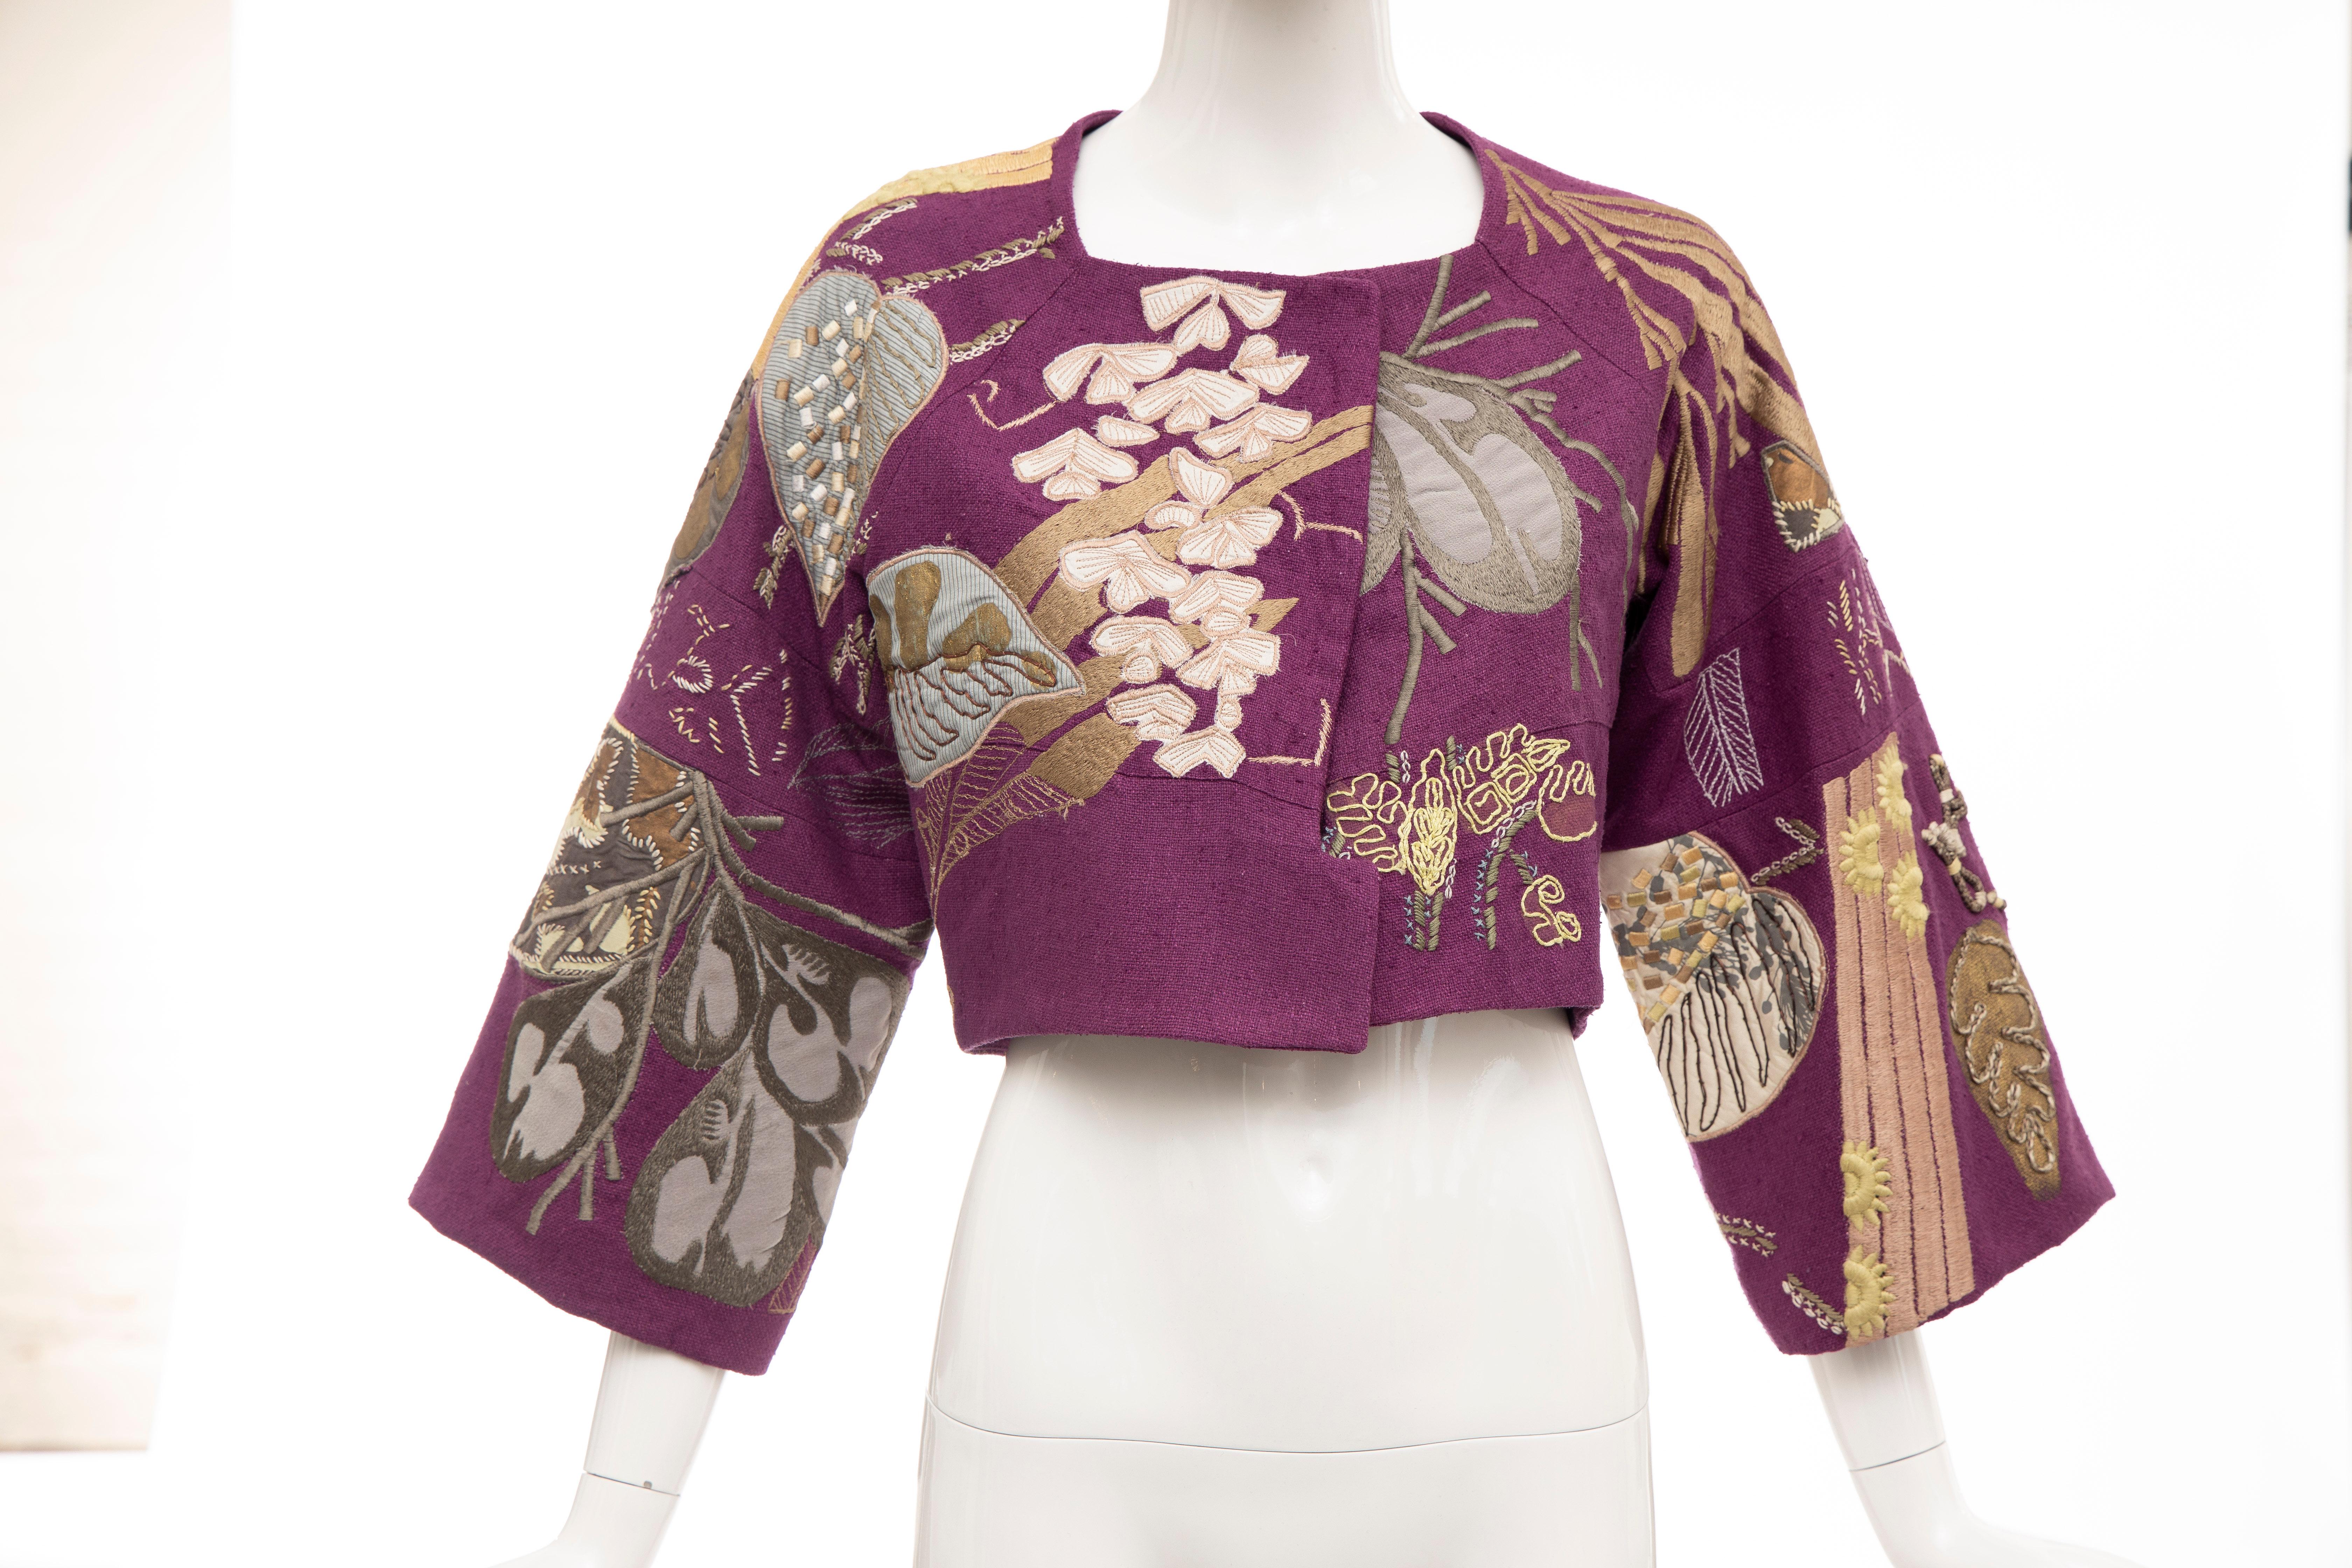 Dries Van Noten Runway Spring 2006, silk magenta embroidered jacket, square neck, kimono sleeves, cropped fit and single hook closure at front.

Size: 36

Bust: 32